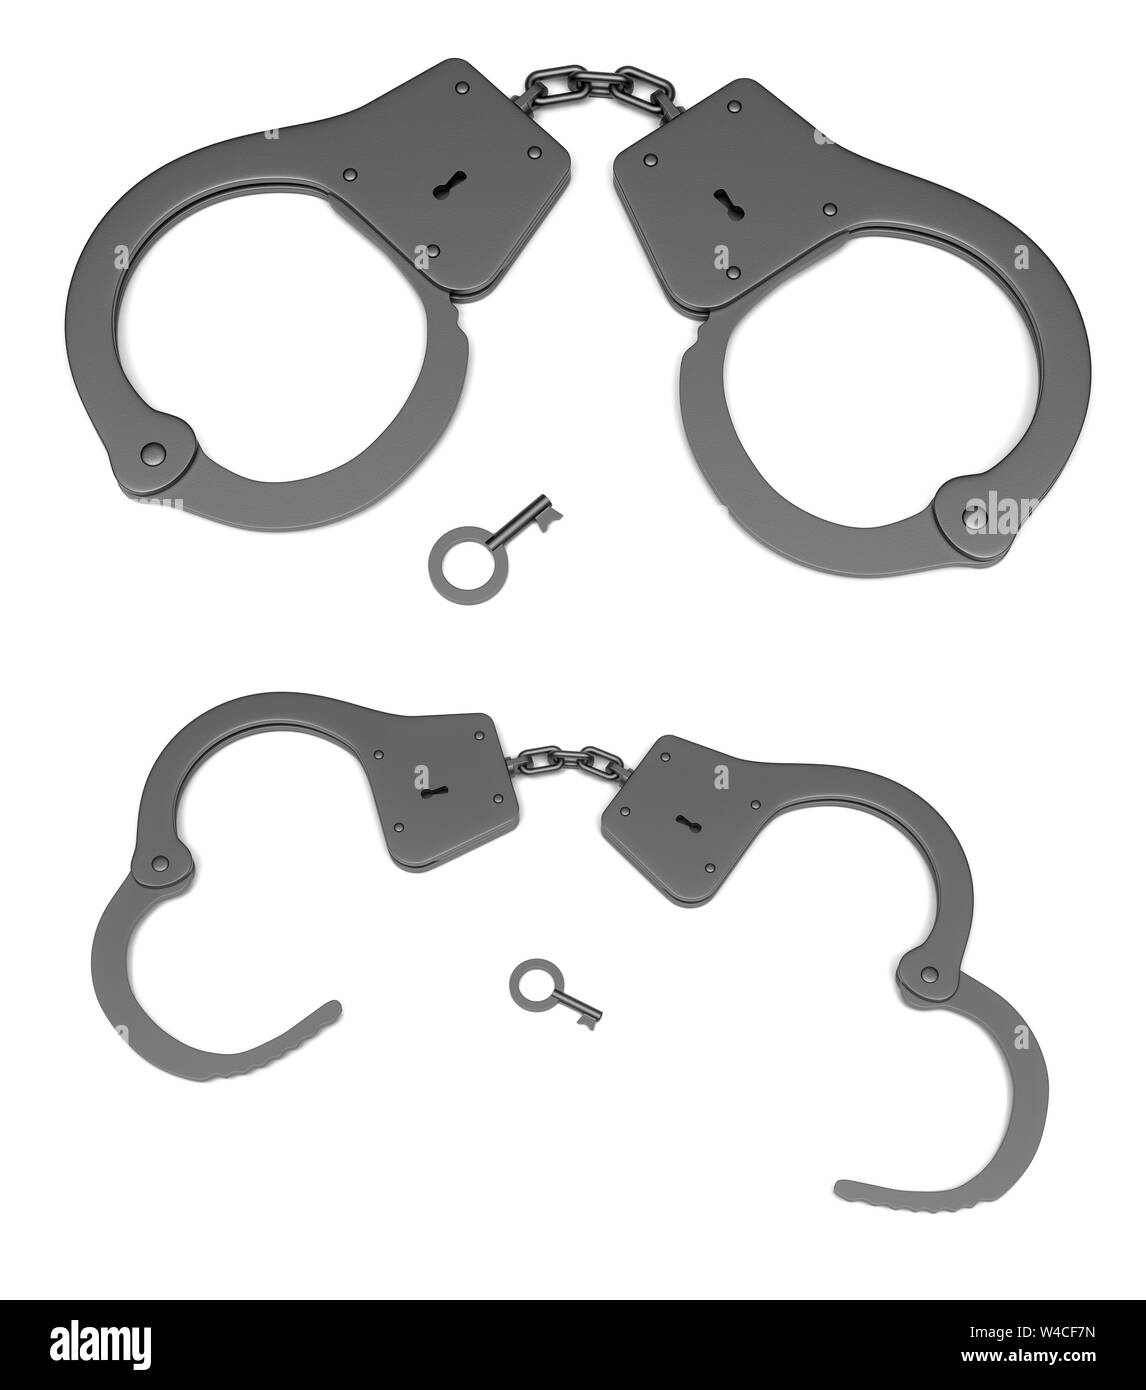 Police handcuffs with a key. Open and closed. 3d rendering illustration isolated Stock Photo